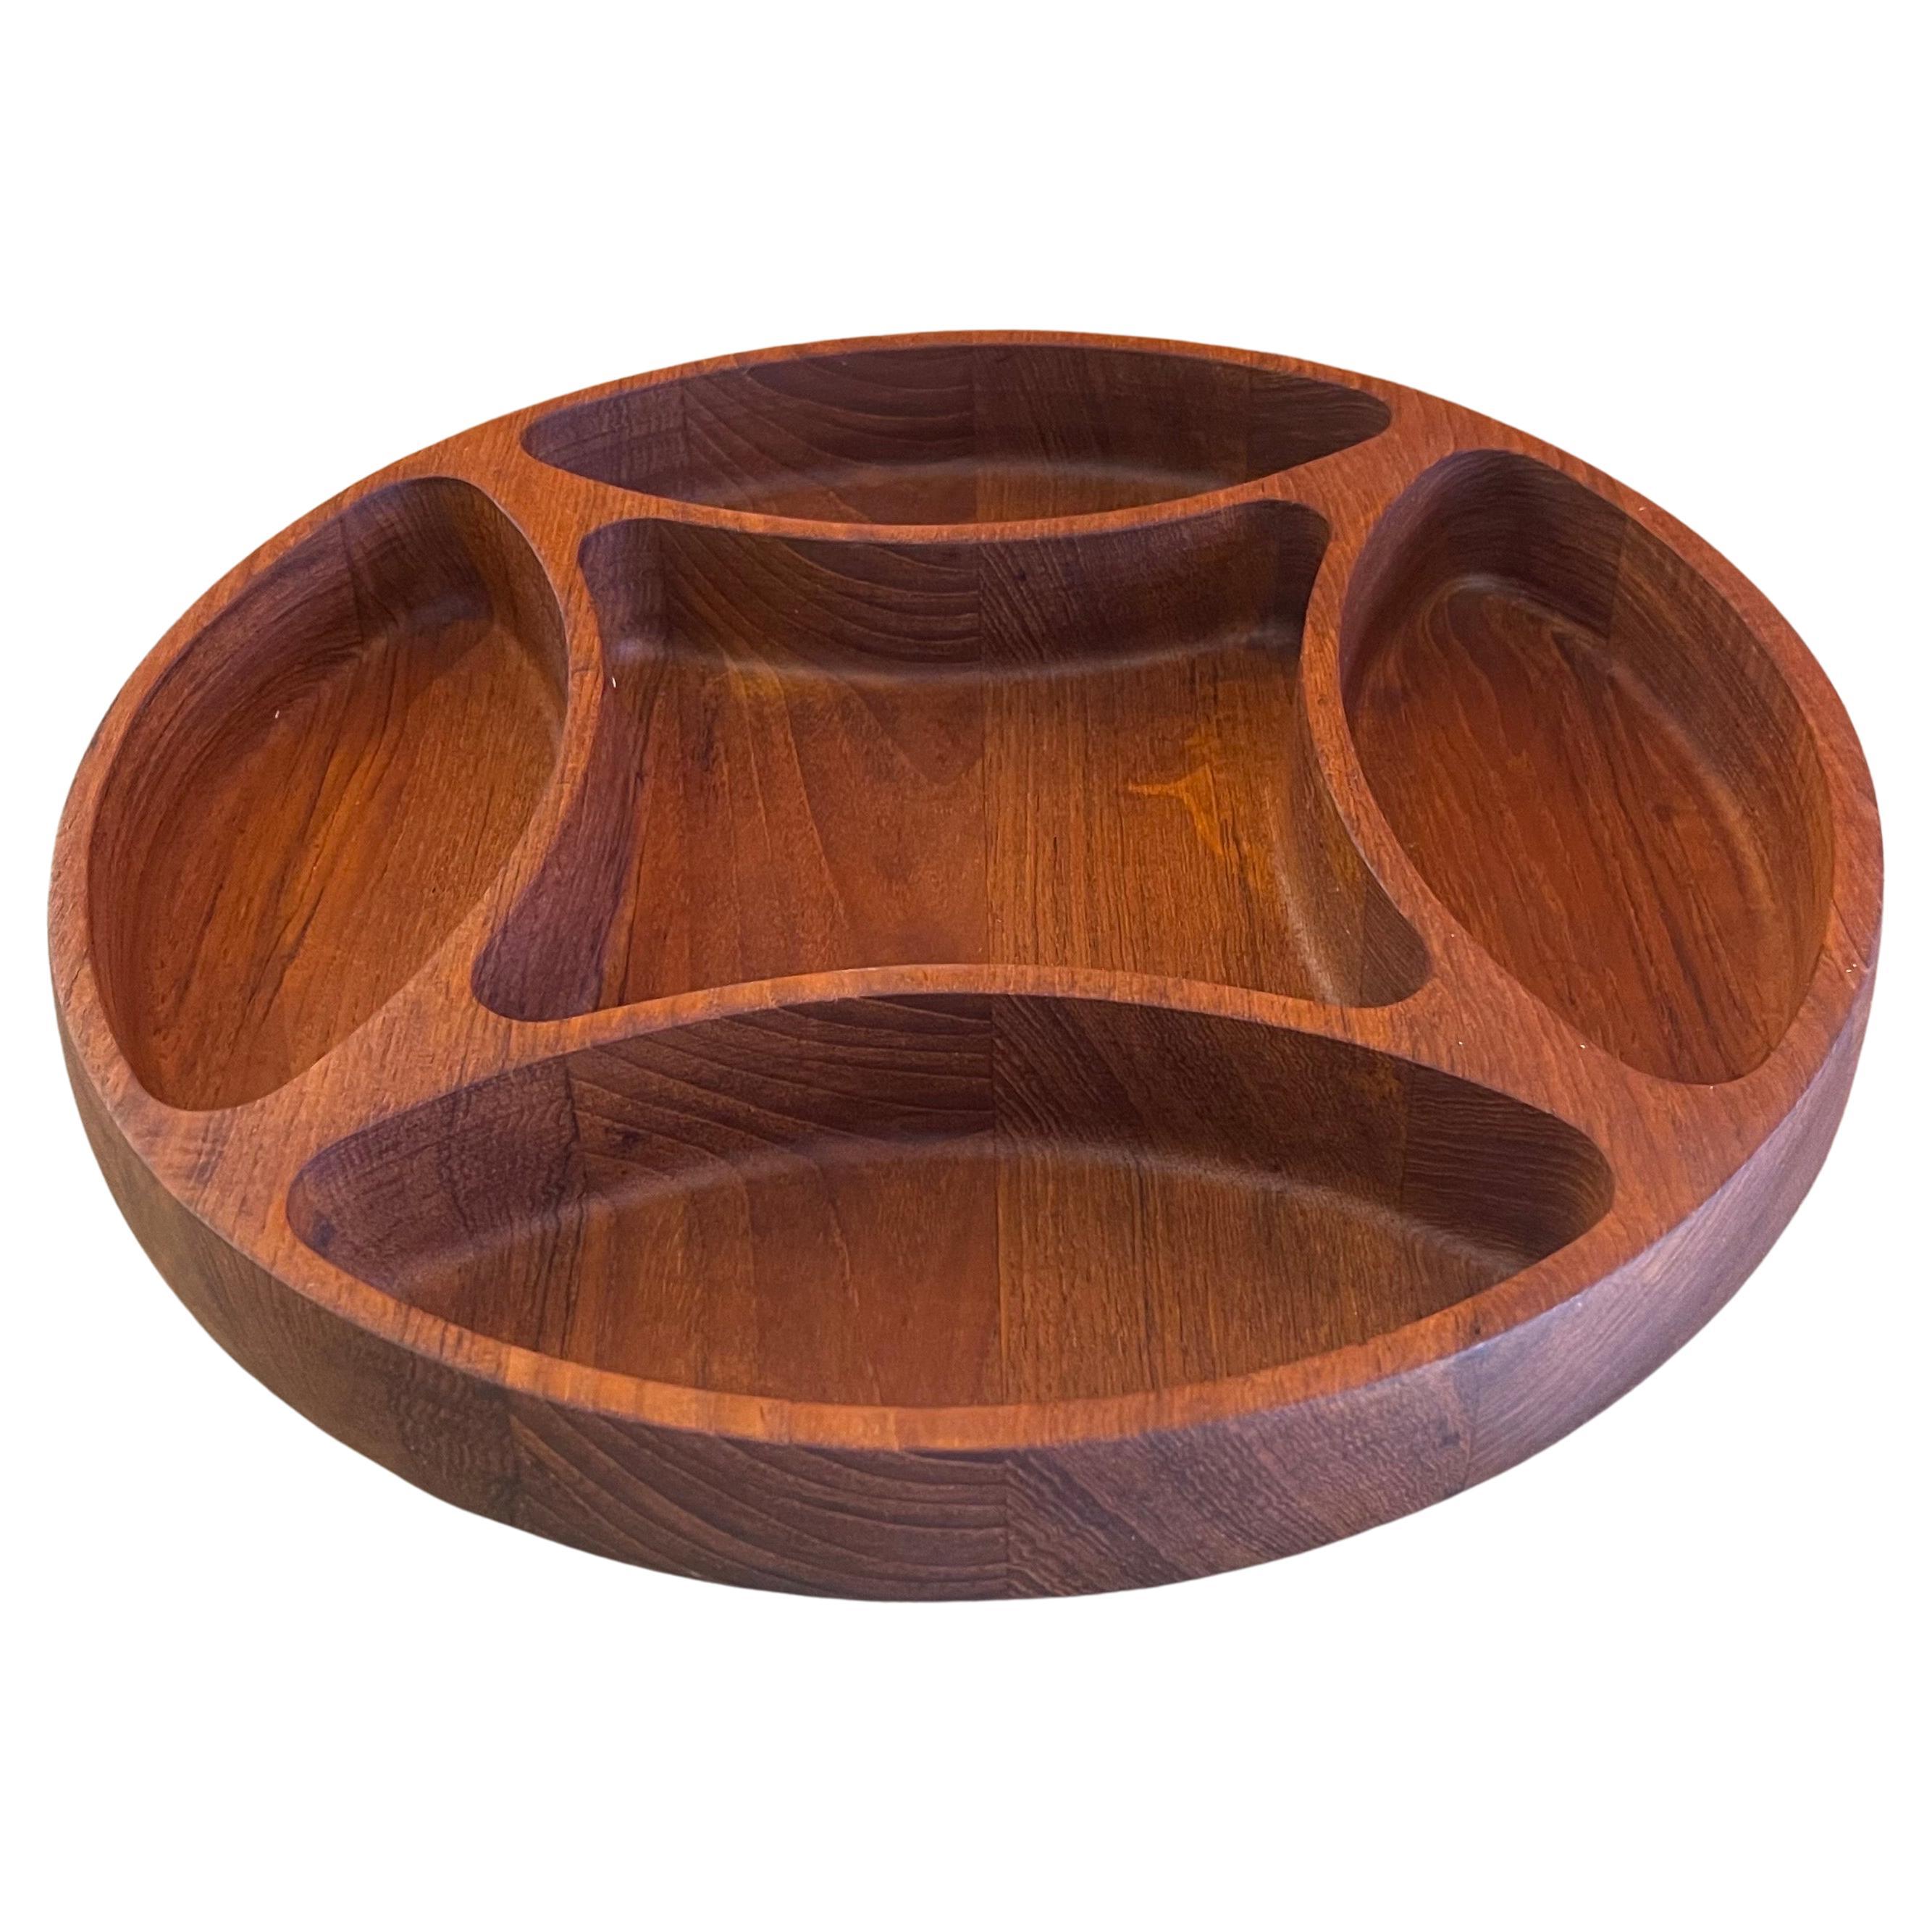 Large Divided Bowl / Tray in Teak by Jens Quistgaard for Dansk For Sale